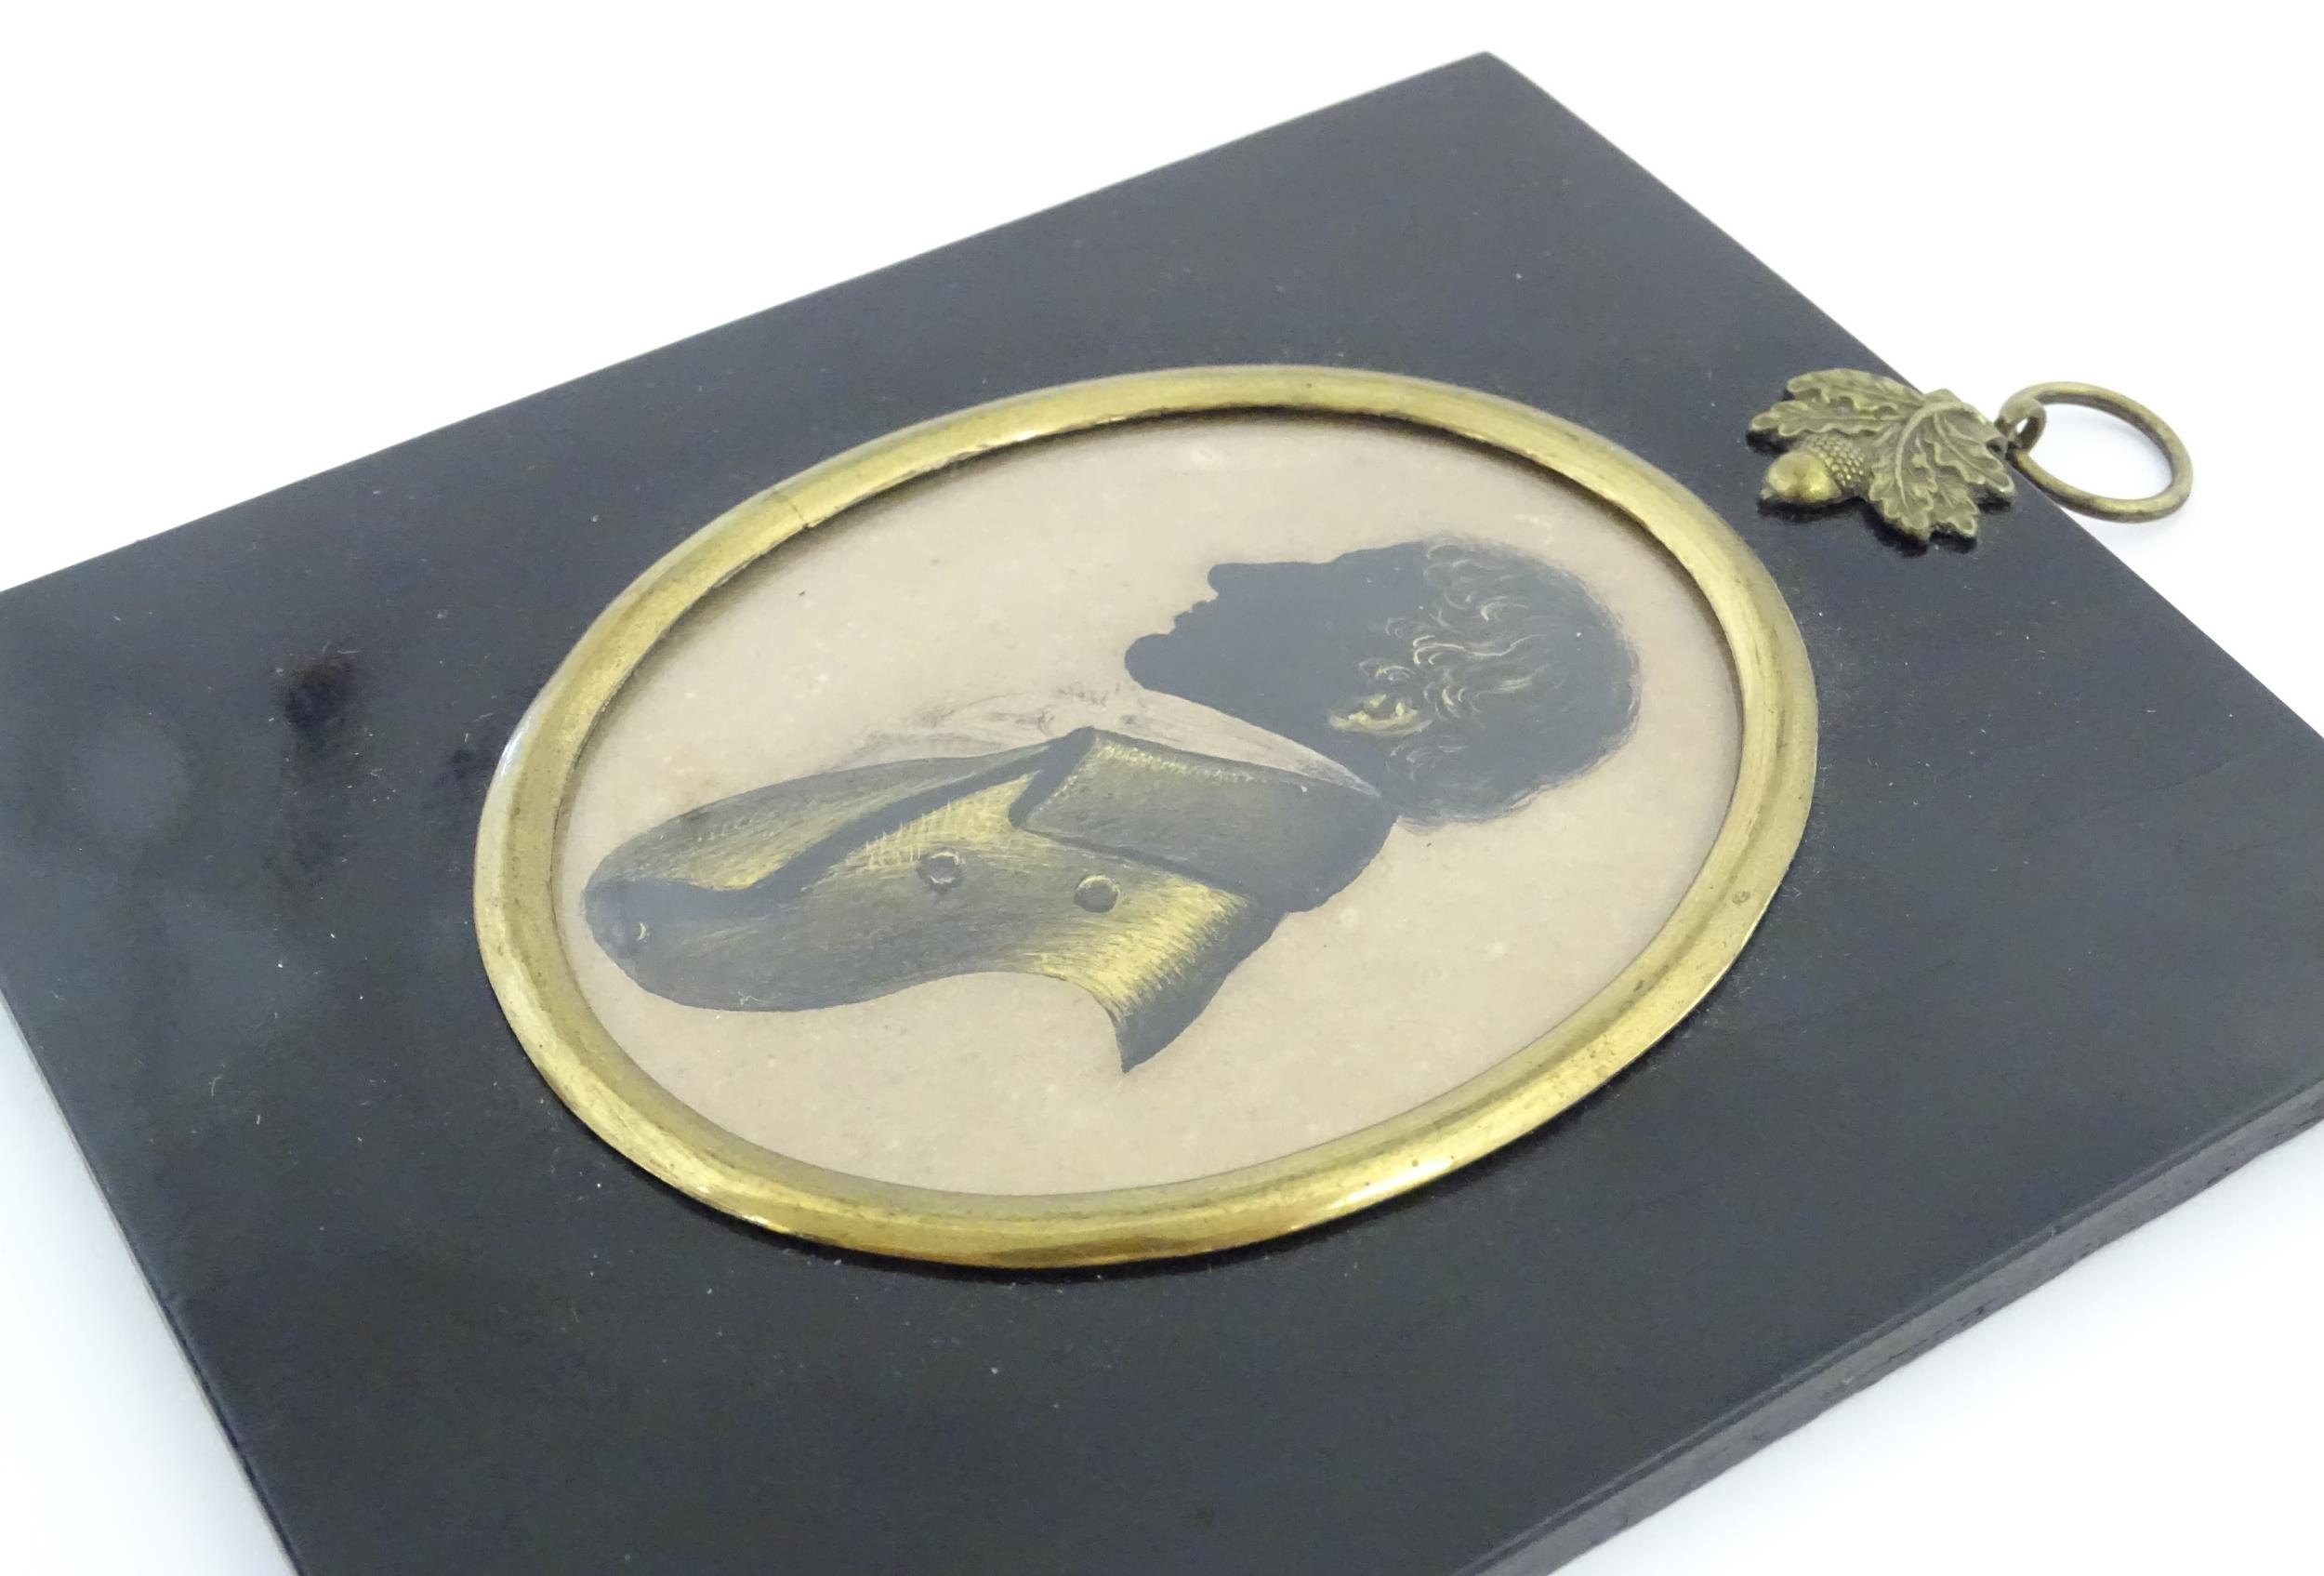 A 19thC silhouette portrait miniature depicting Charles Lamb, aged 23, with gilt highlights, after - Image 5 of 6